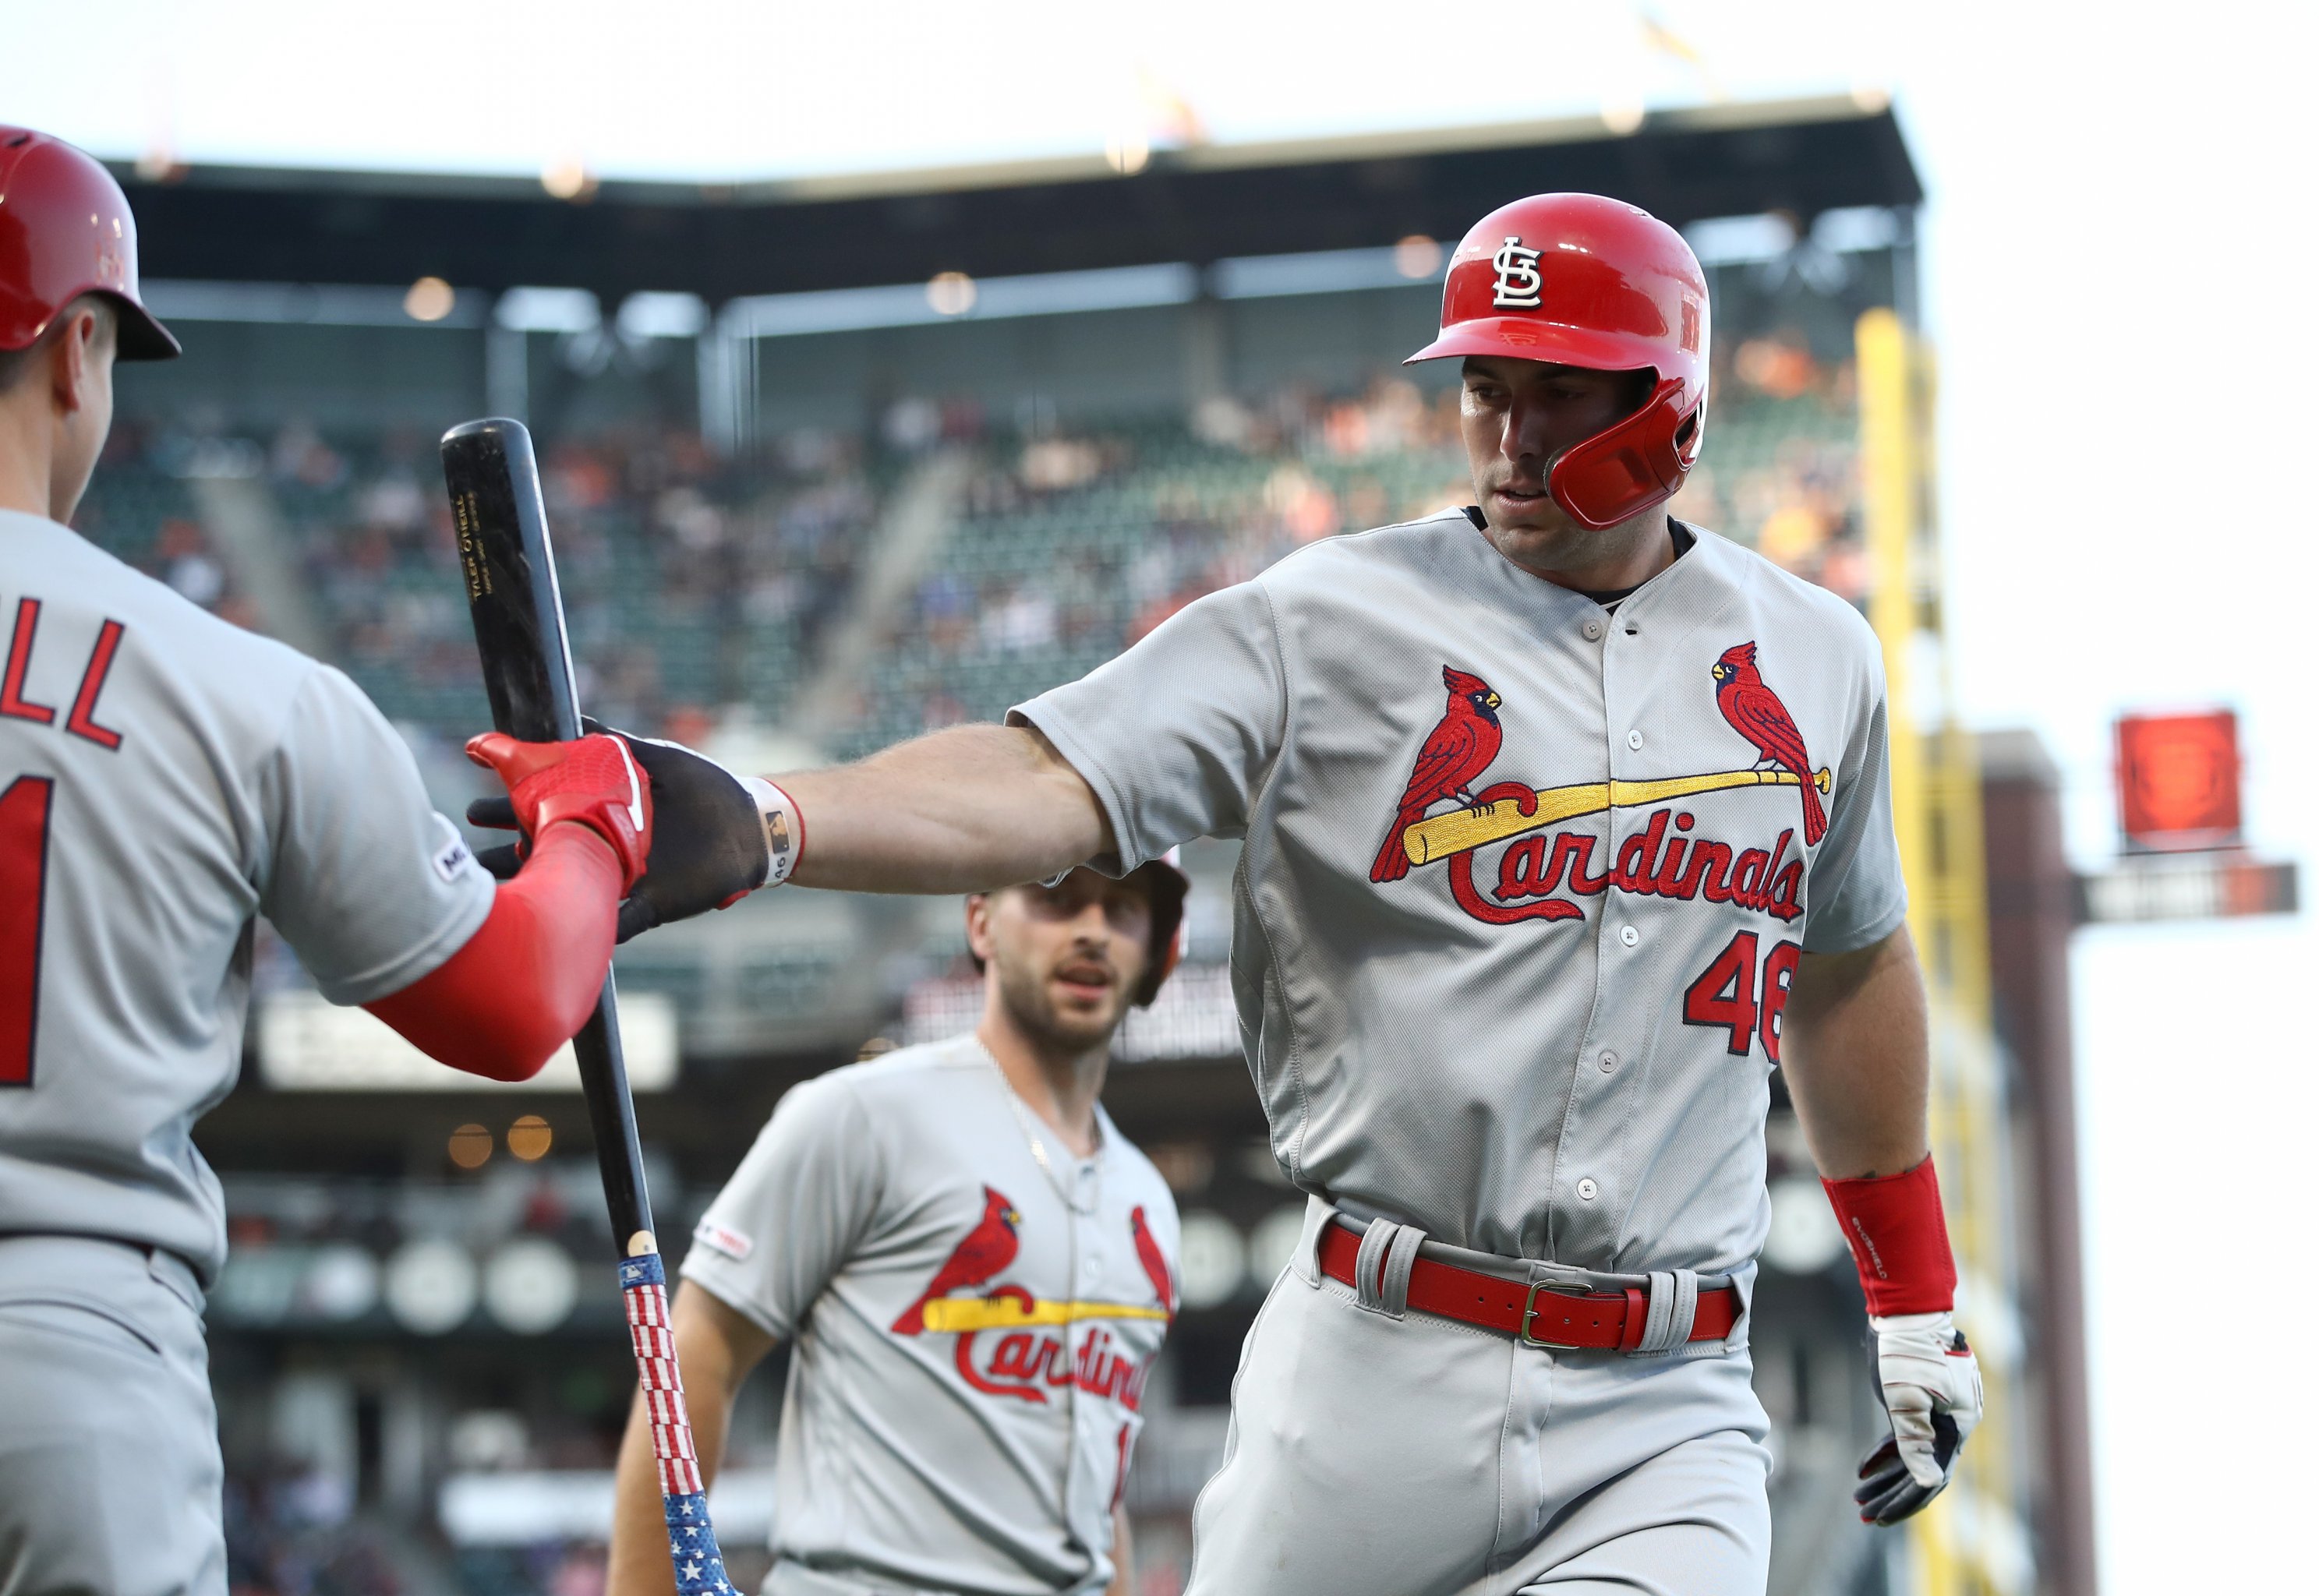 Playoff chase ends for Redbirds